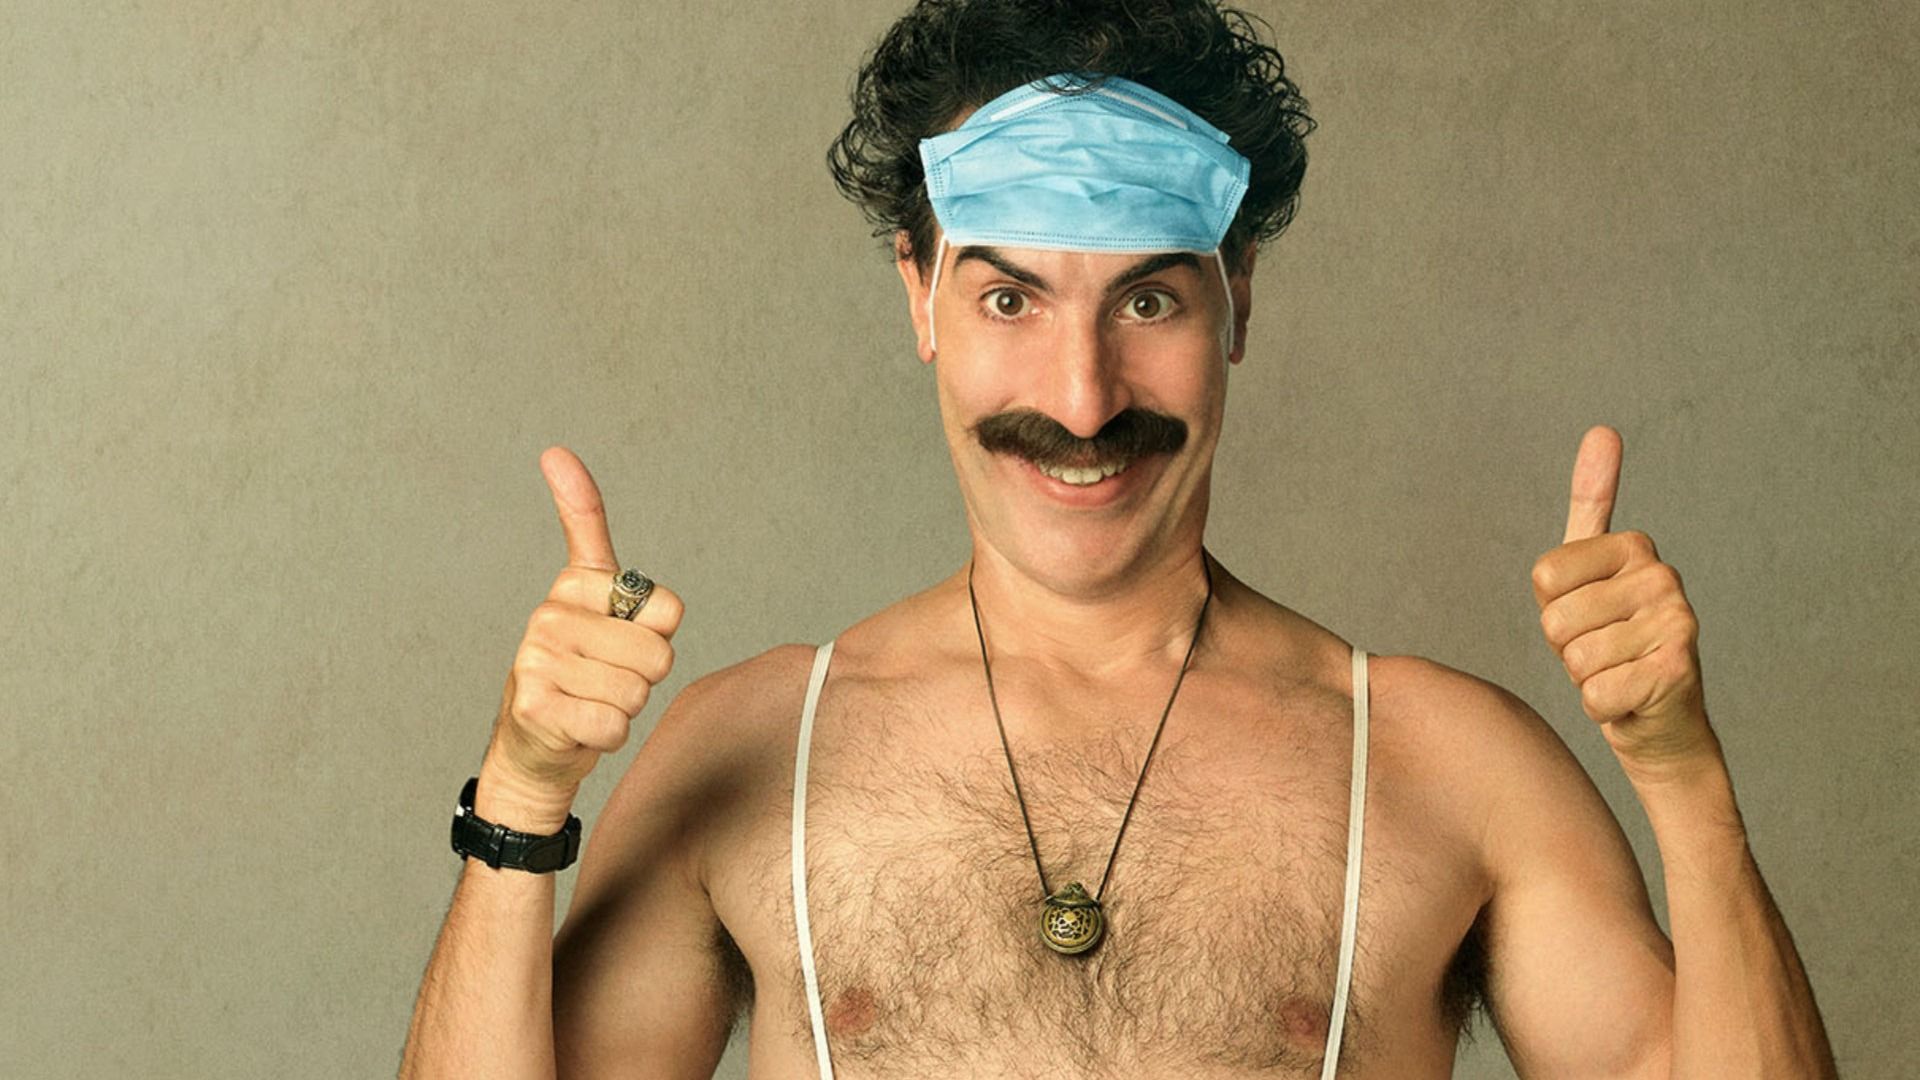 Borat 2 review: A very niiice surprise from Sacha Baron Cohen